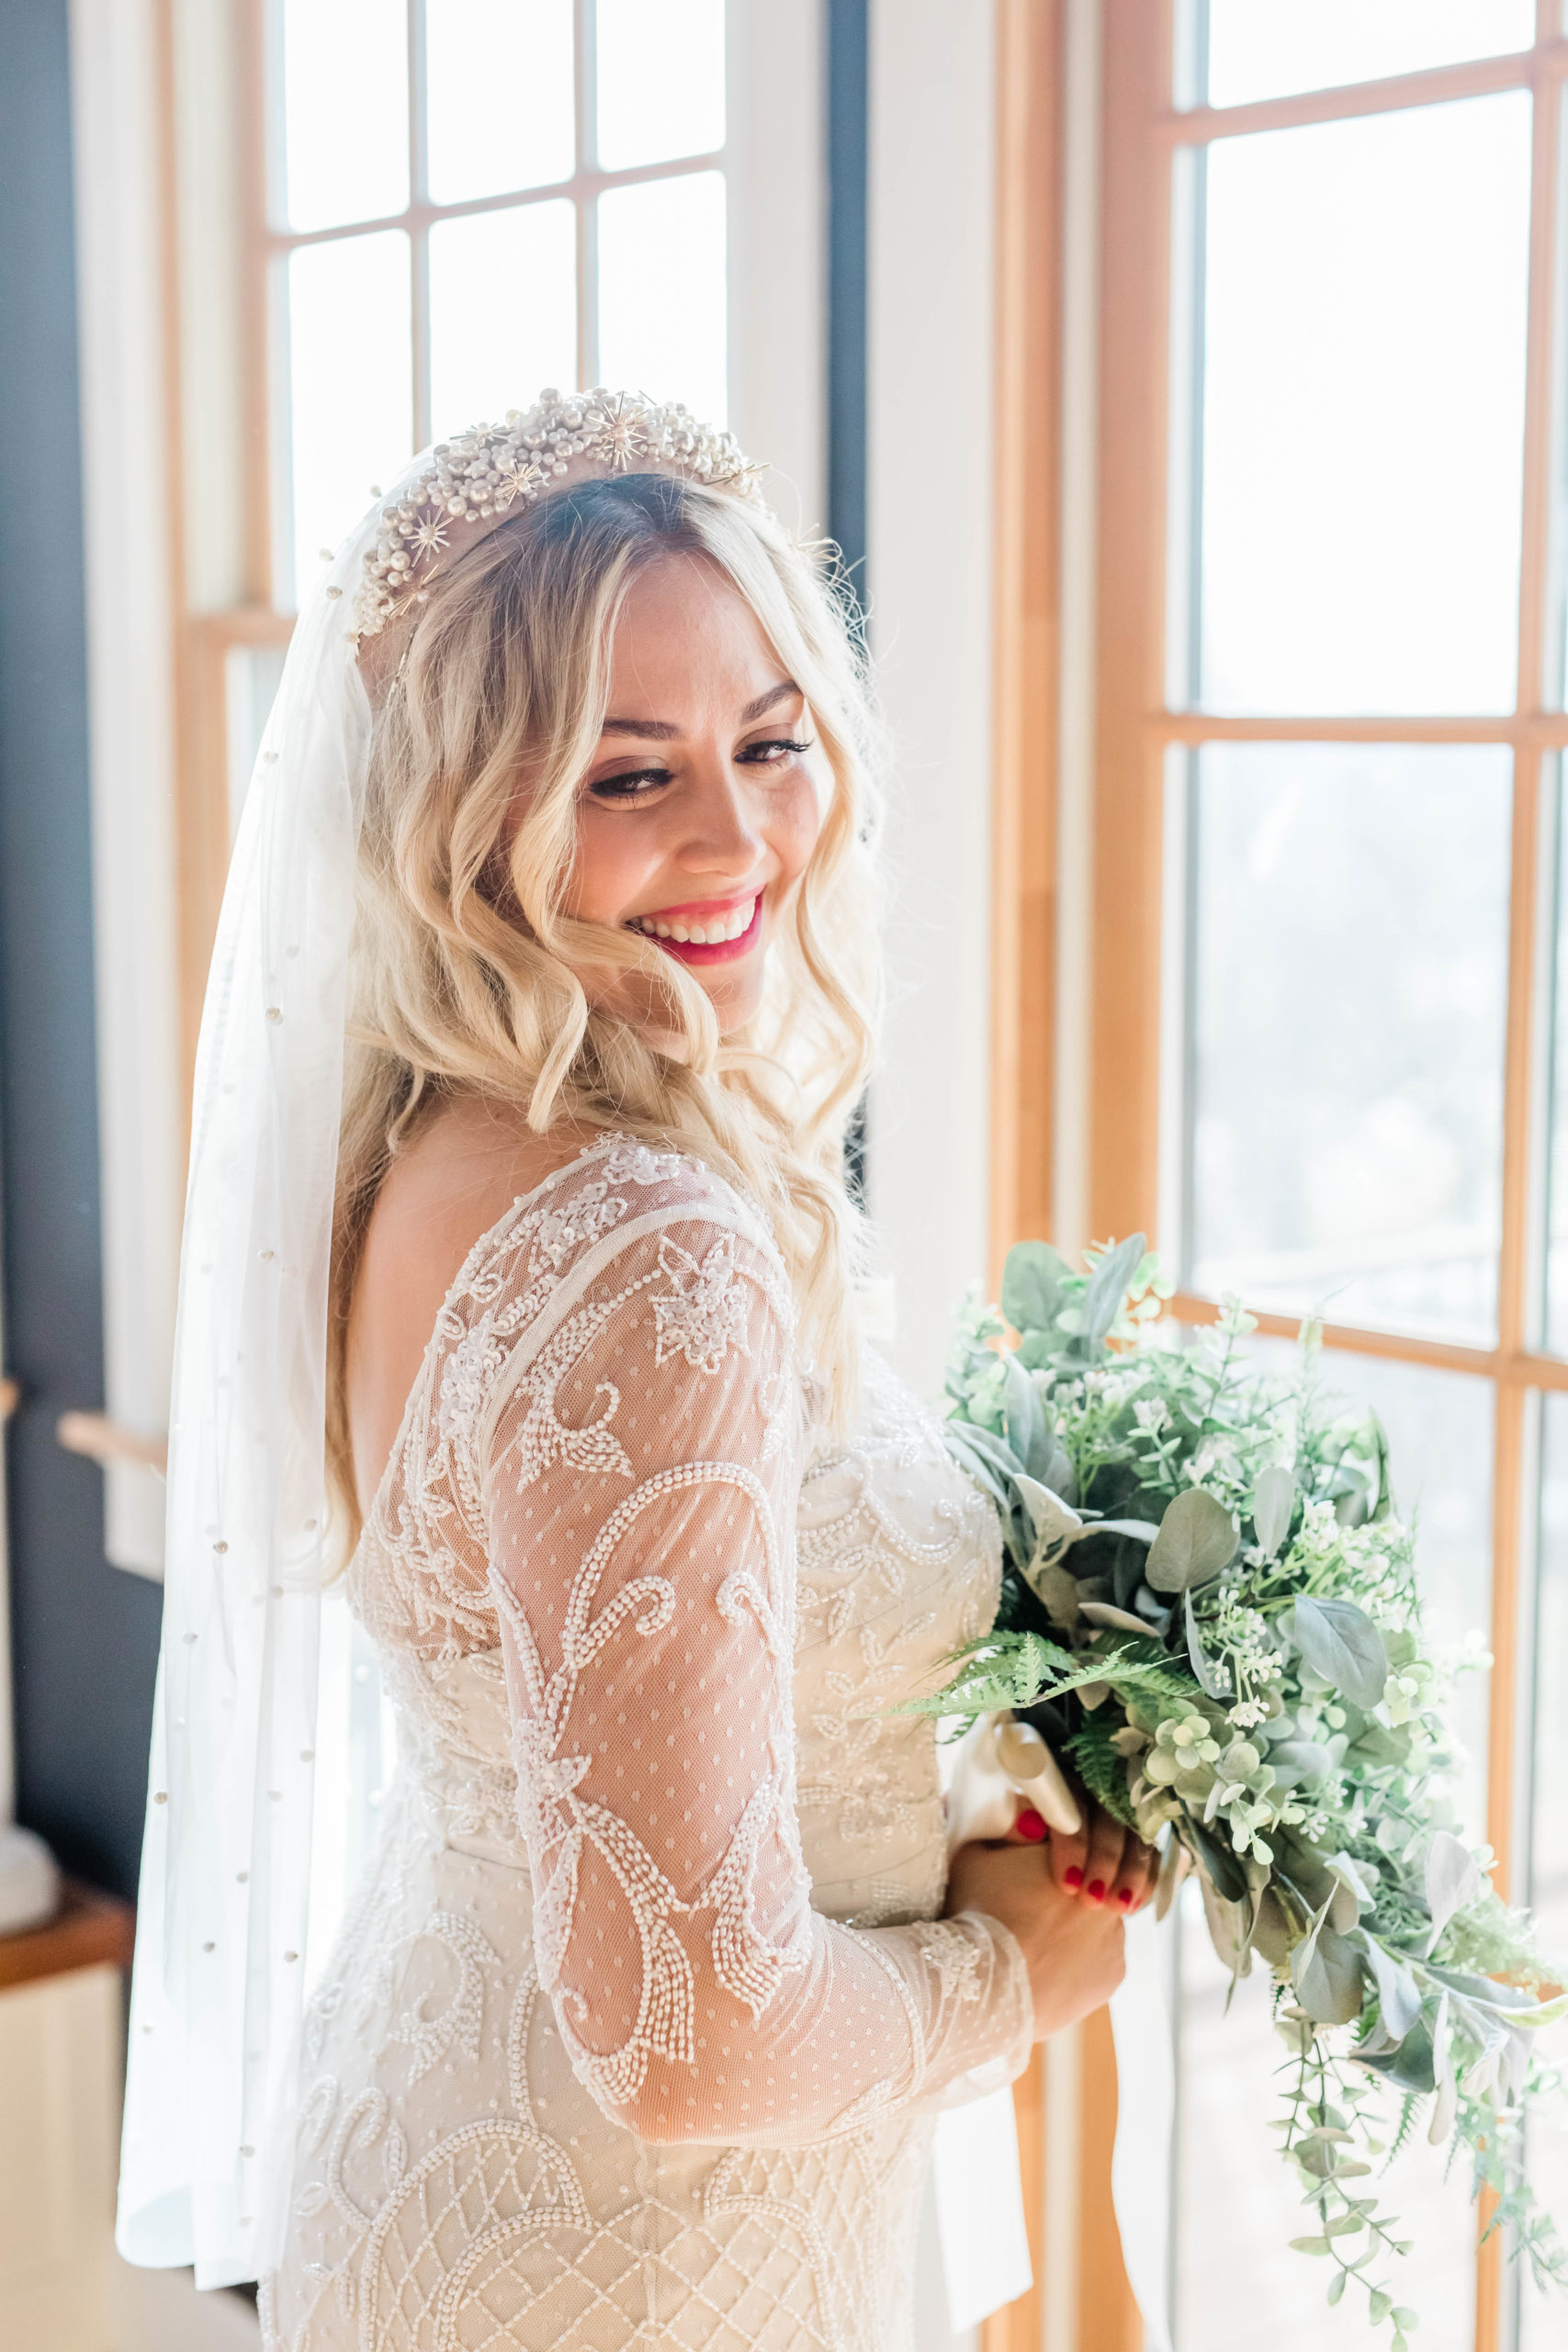 wedding hairstyle with long blonde curly hair with a star veil on a bride with a lace wedding gown